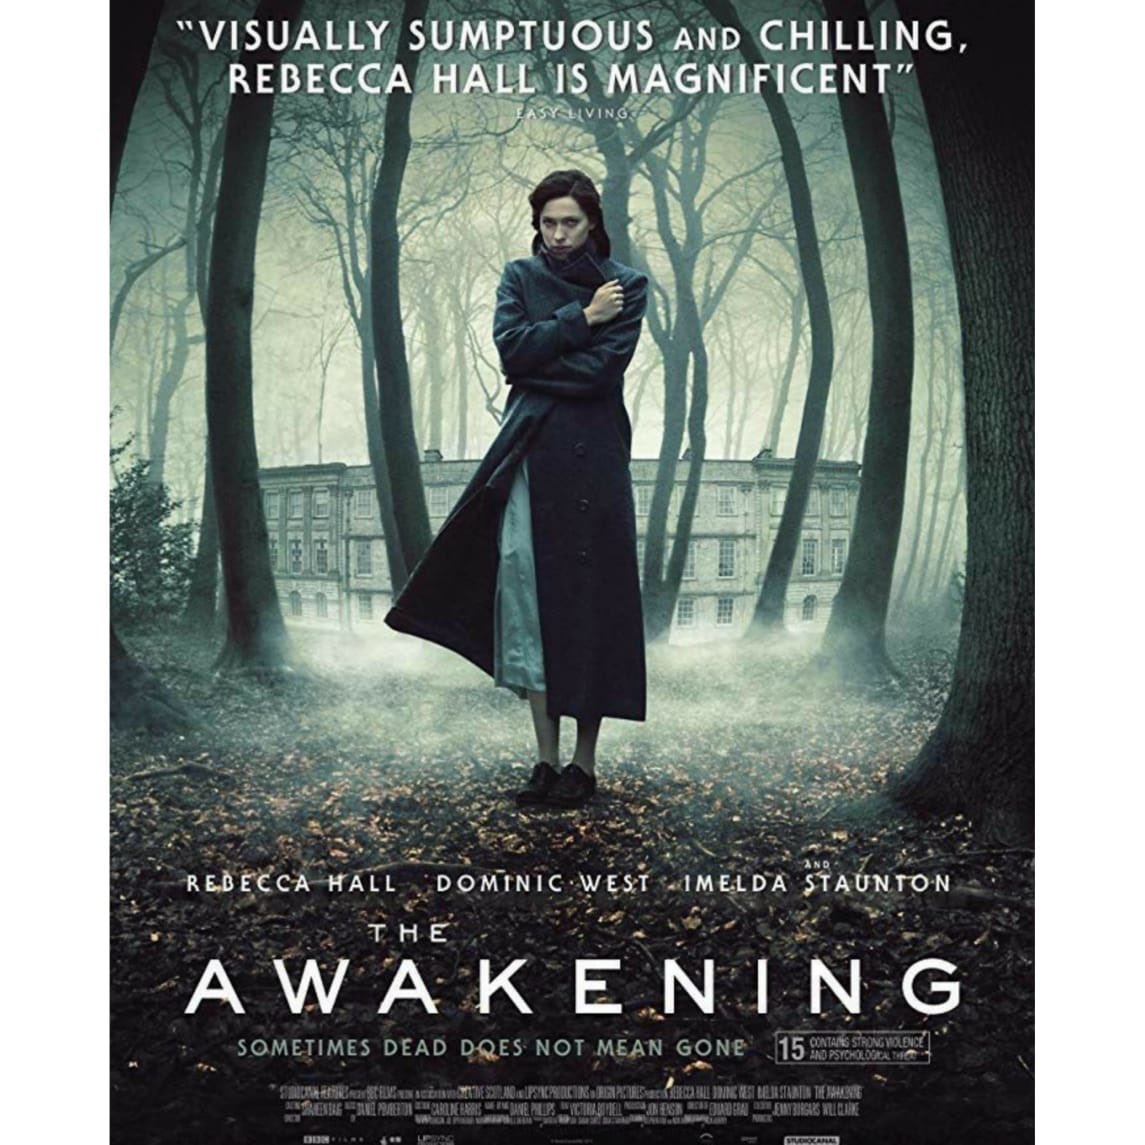 #theawakening is good supernatural horror. Excellent premise & atmospherics plus a superb performance by #rebeccahall . Recommended for horror buffs. #nickmurphy #stephenvolk #horrorthriller